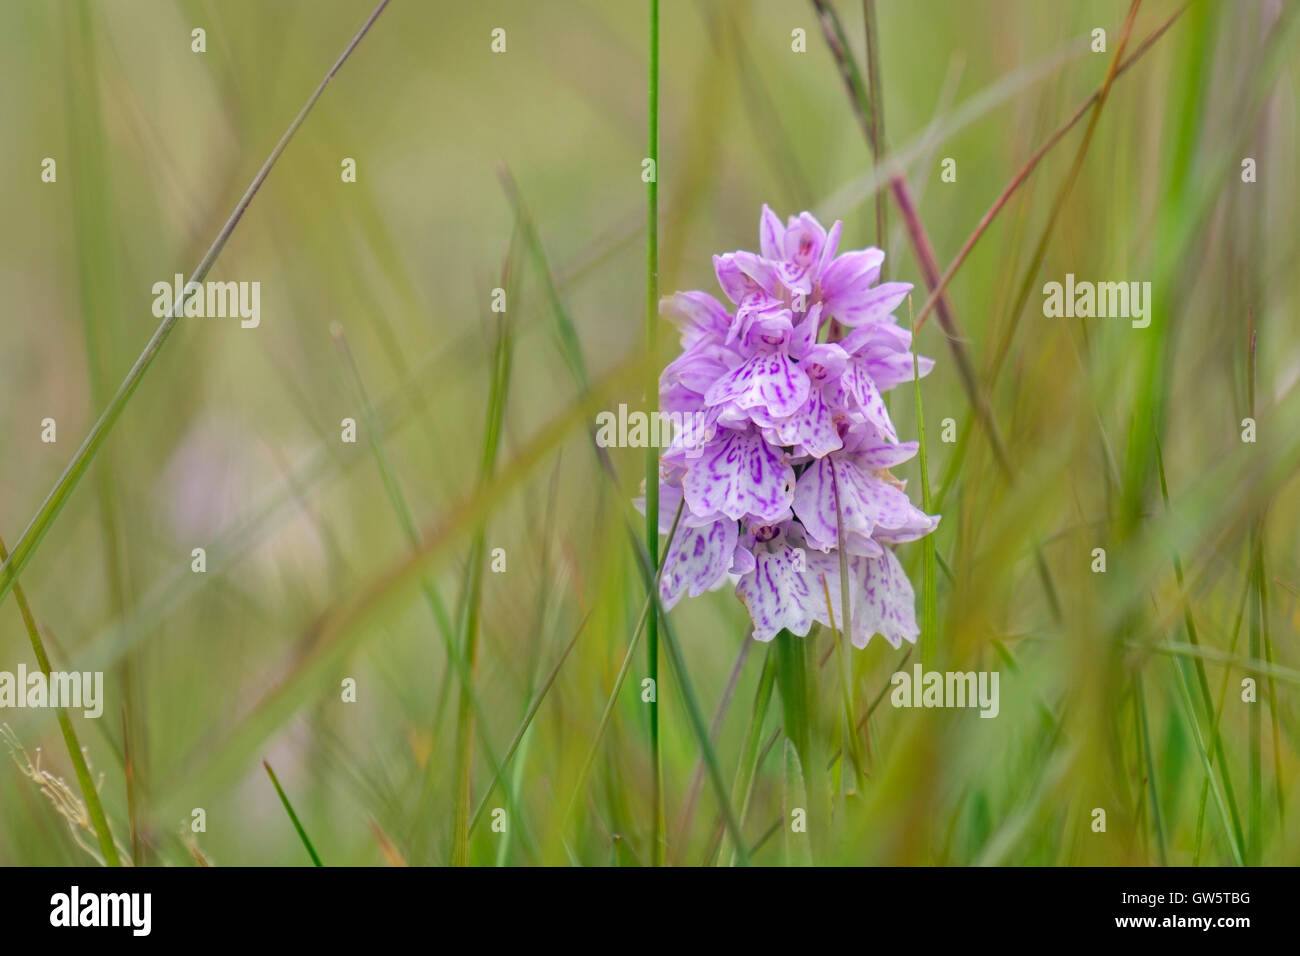 A wild Heath Spotted Orchid (Dactylorhiza maculata) flower growing in damp acidic grassland. Snaefellsnes Peninsula, Iceland Stock Photo